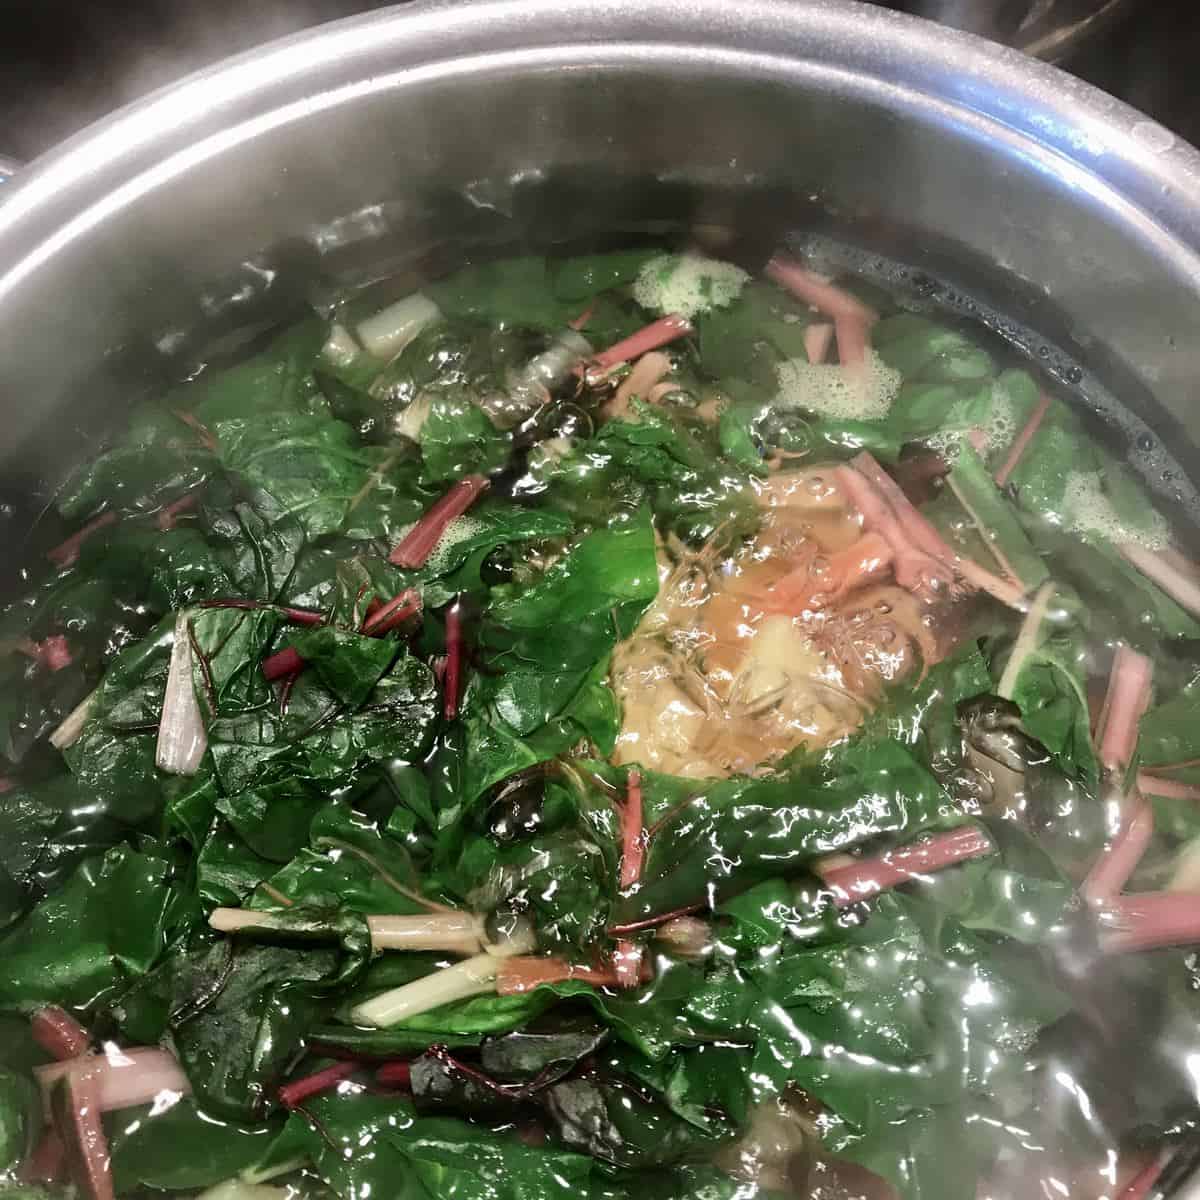 Swiss chard and potatoes simmering in a pot of water.